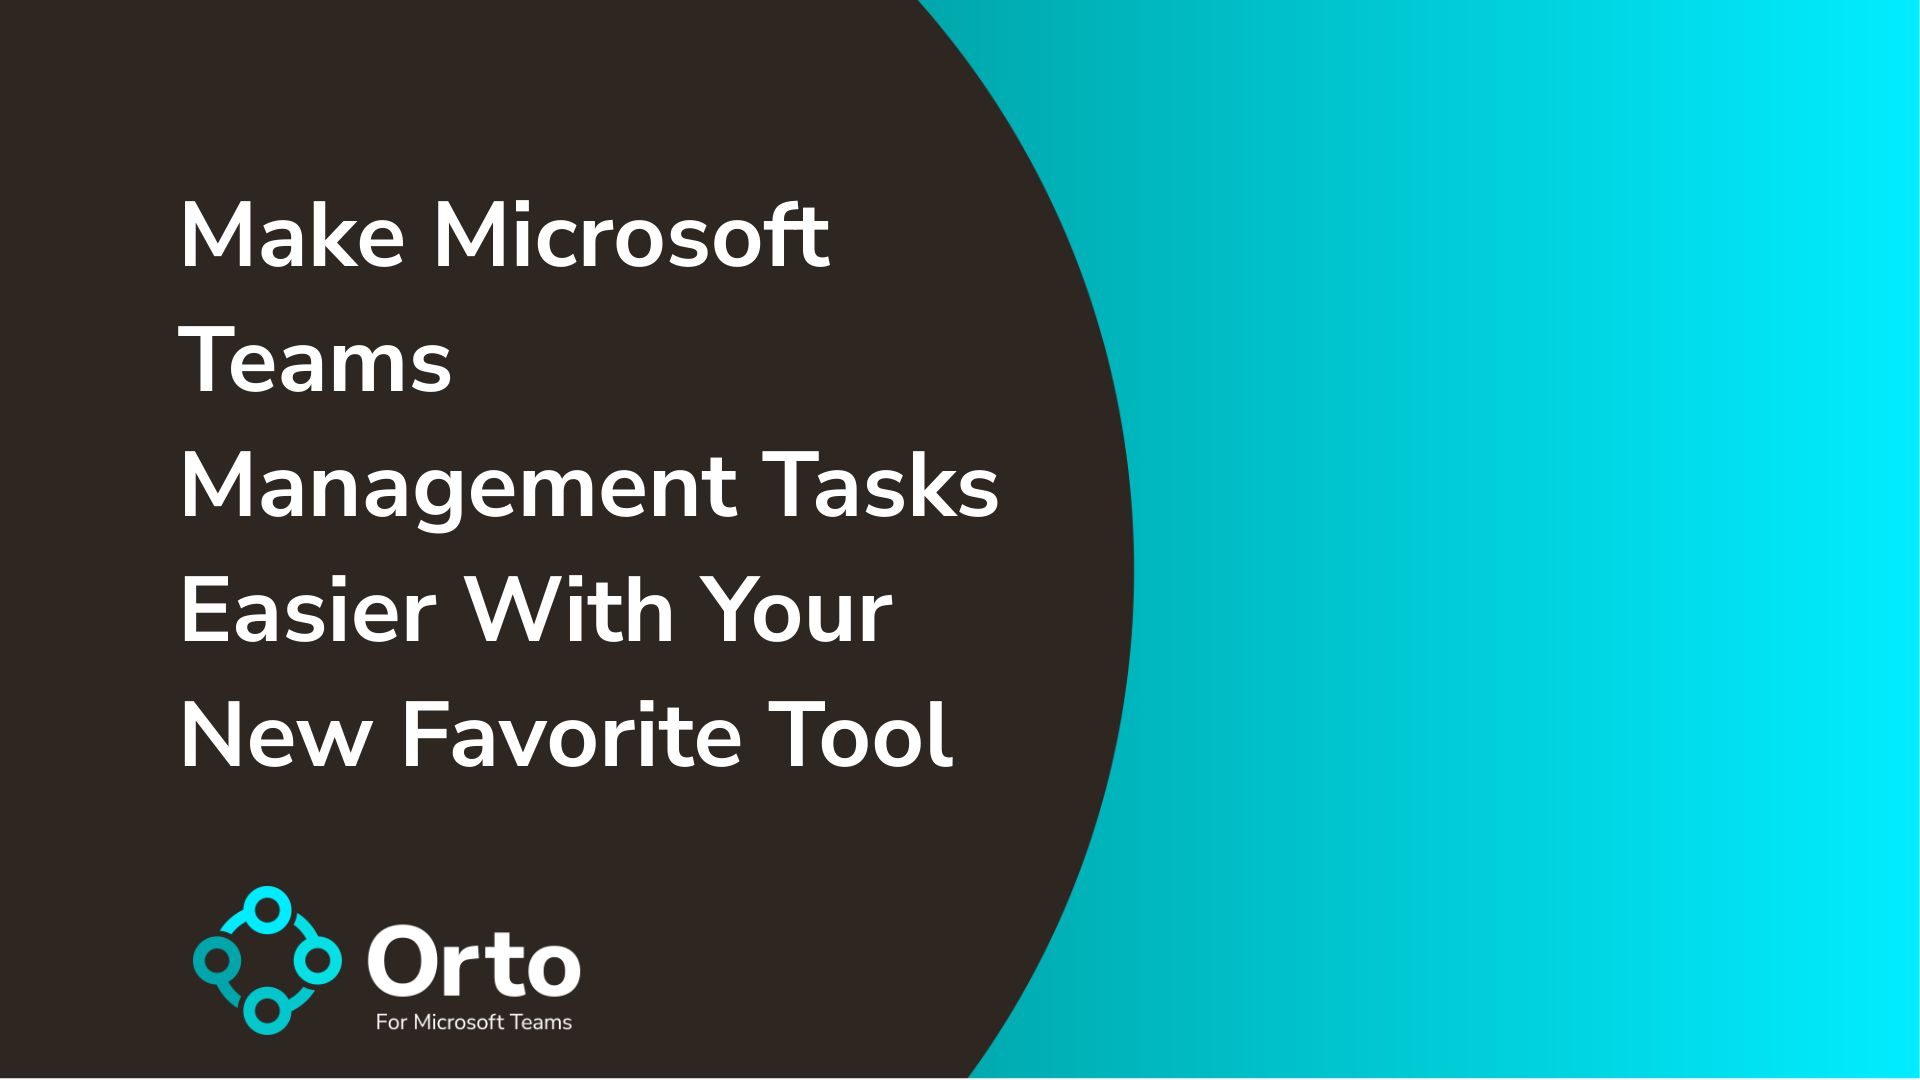 Make Microsoft Teams Management Tasks Easier With Your New Favorite Tool